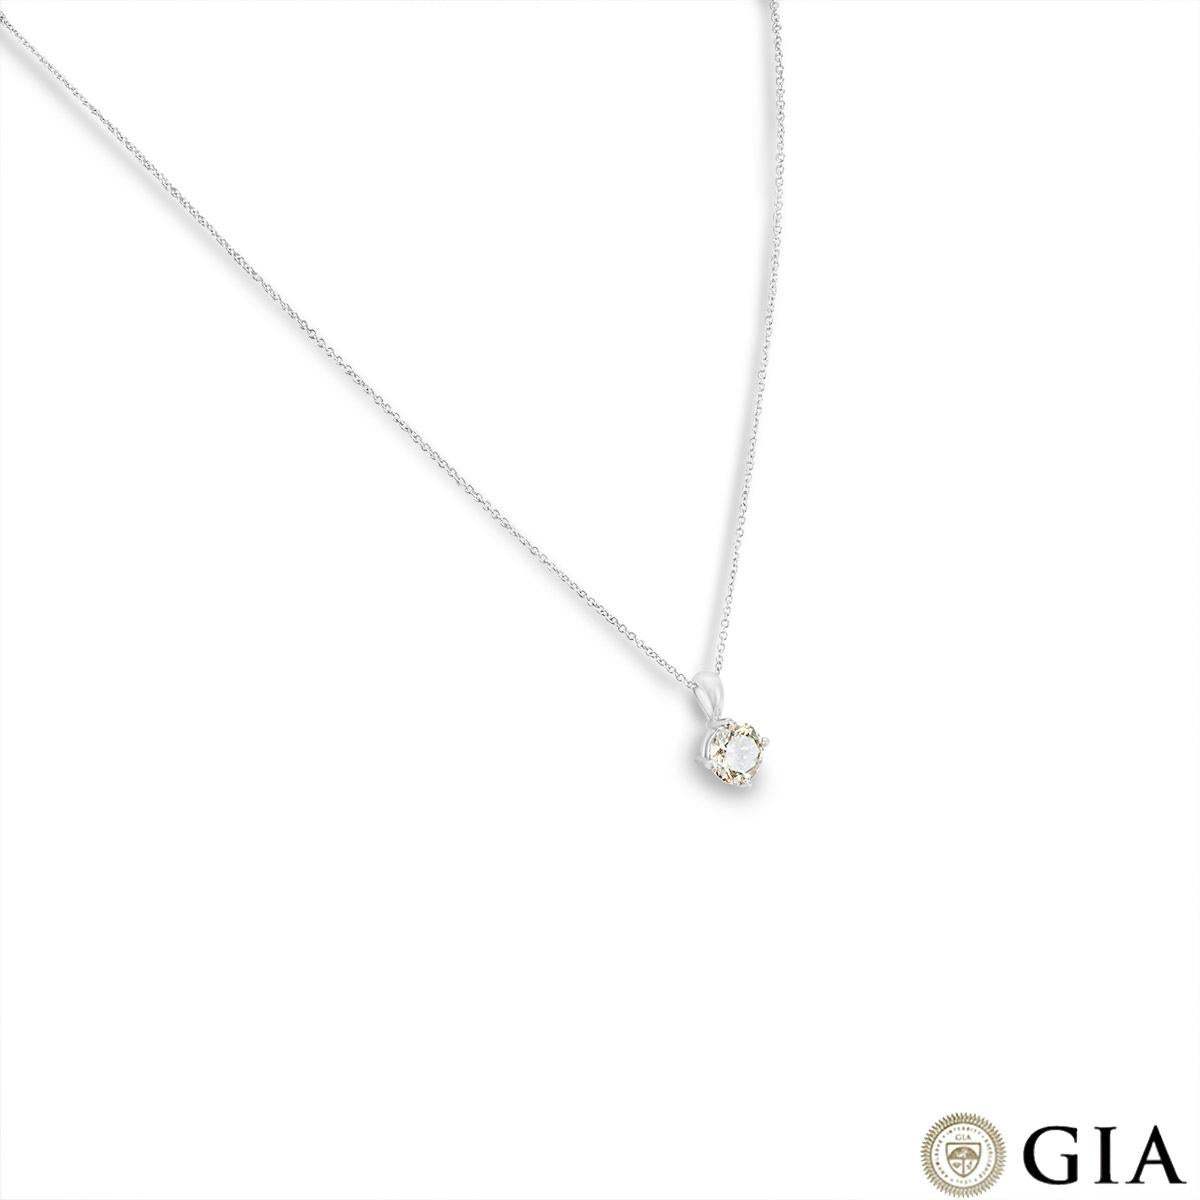 A unique 18k white gold fancy coloured diamond pendant. The four prong solitaire pendant features a round brilliant cut diamond weighing 1.50ct, fancy grayish greenish yellow colour and VS2 clarity. The pendant suspends from a 16-inch chain that